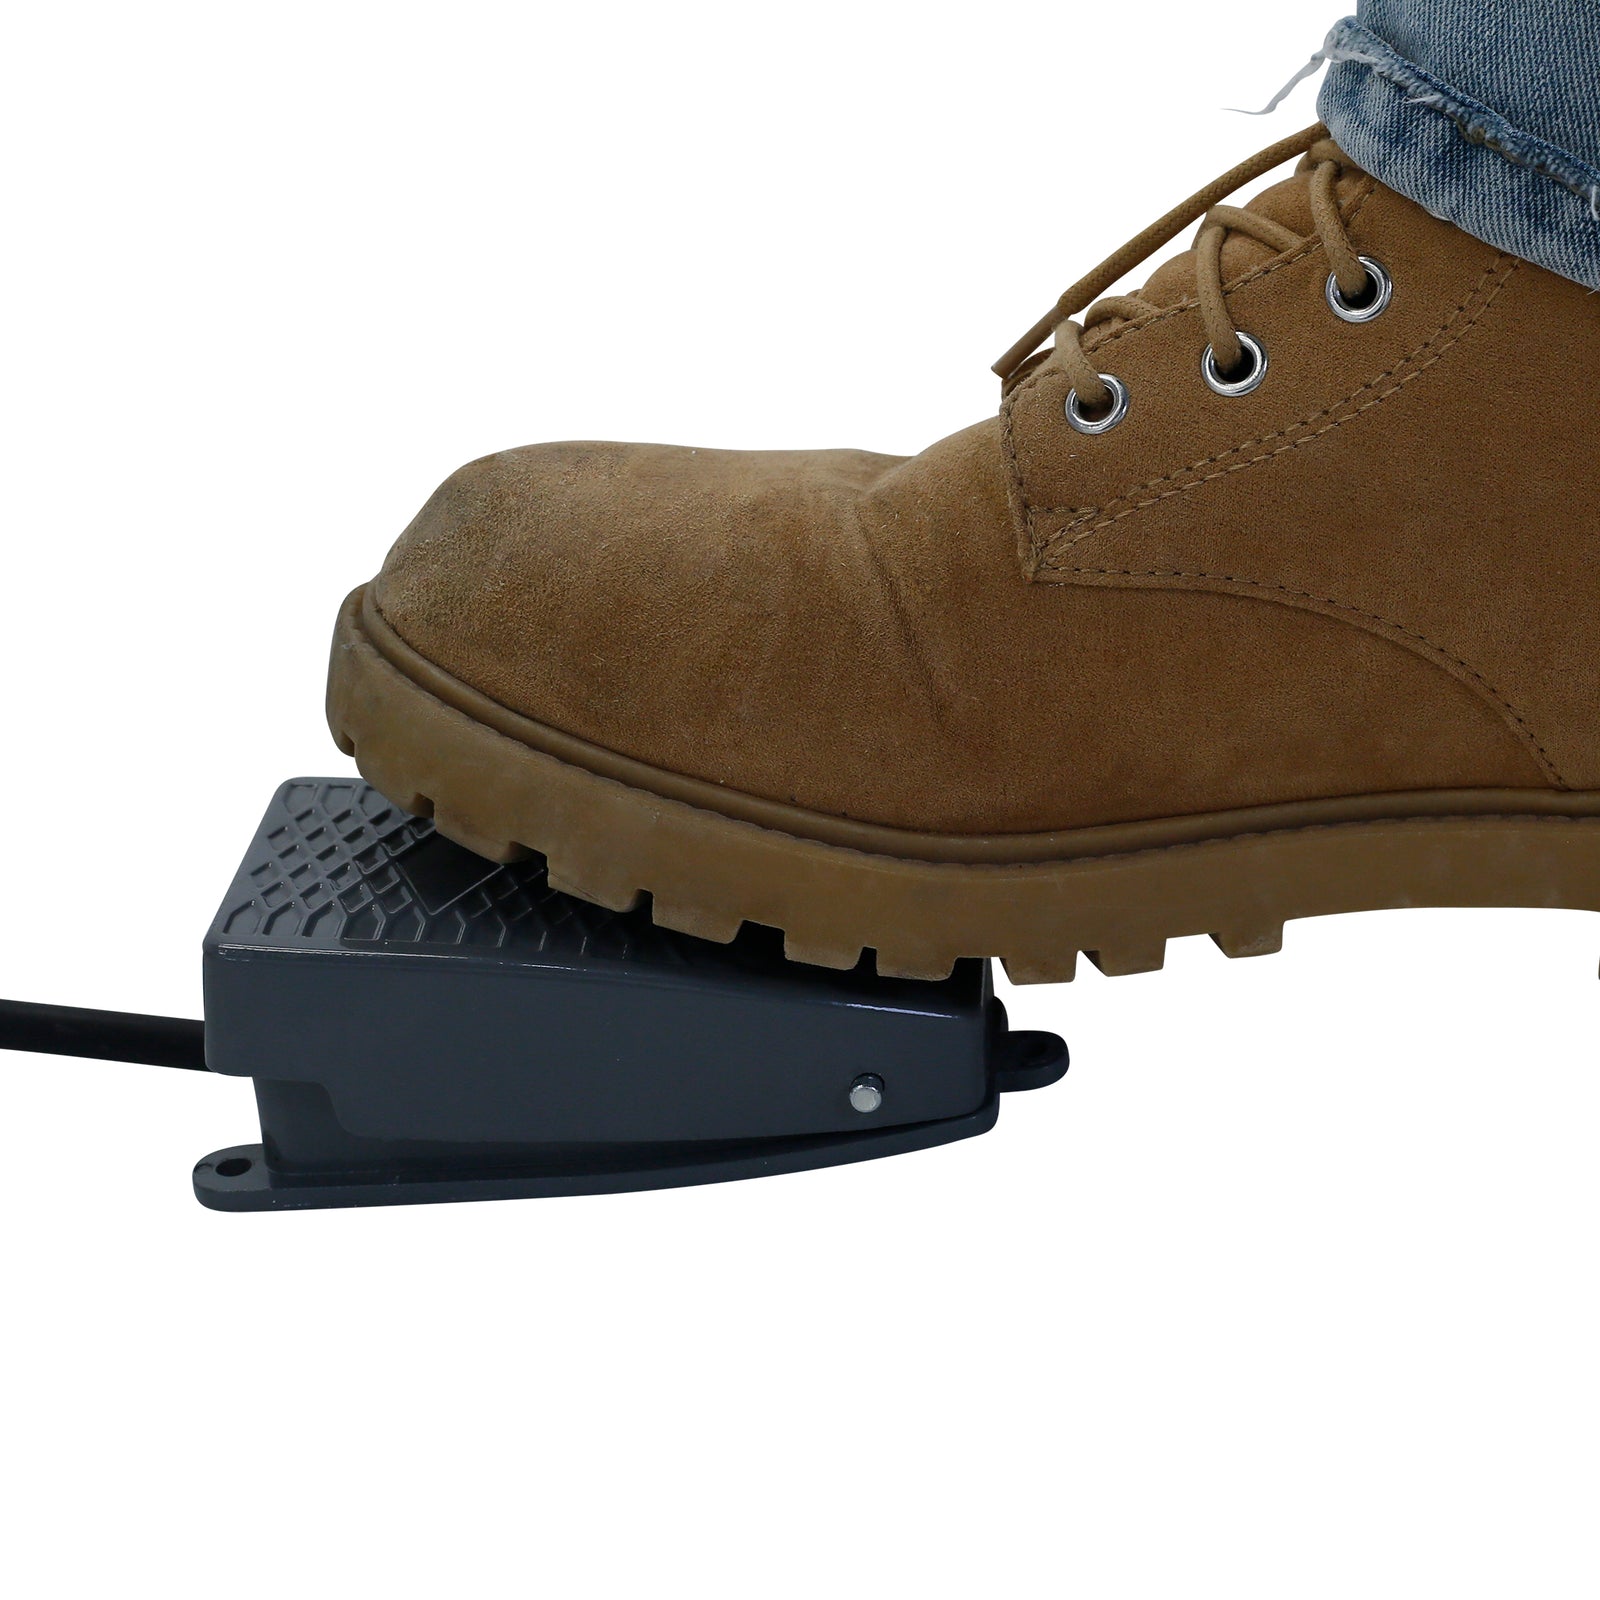 Close up of the ark grey pedal belonging to a JORES TECHNOLOGIES® linear weighing machine. A person wearing brown boots and jeans can be seen pressing down on the pedal to signal the machine to initiate a dispensing cycle